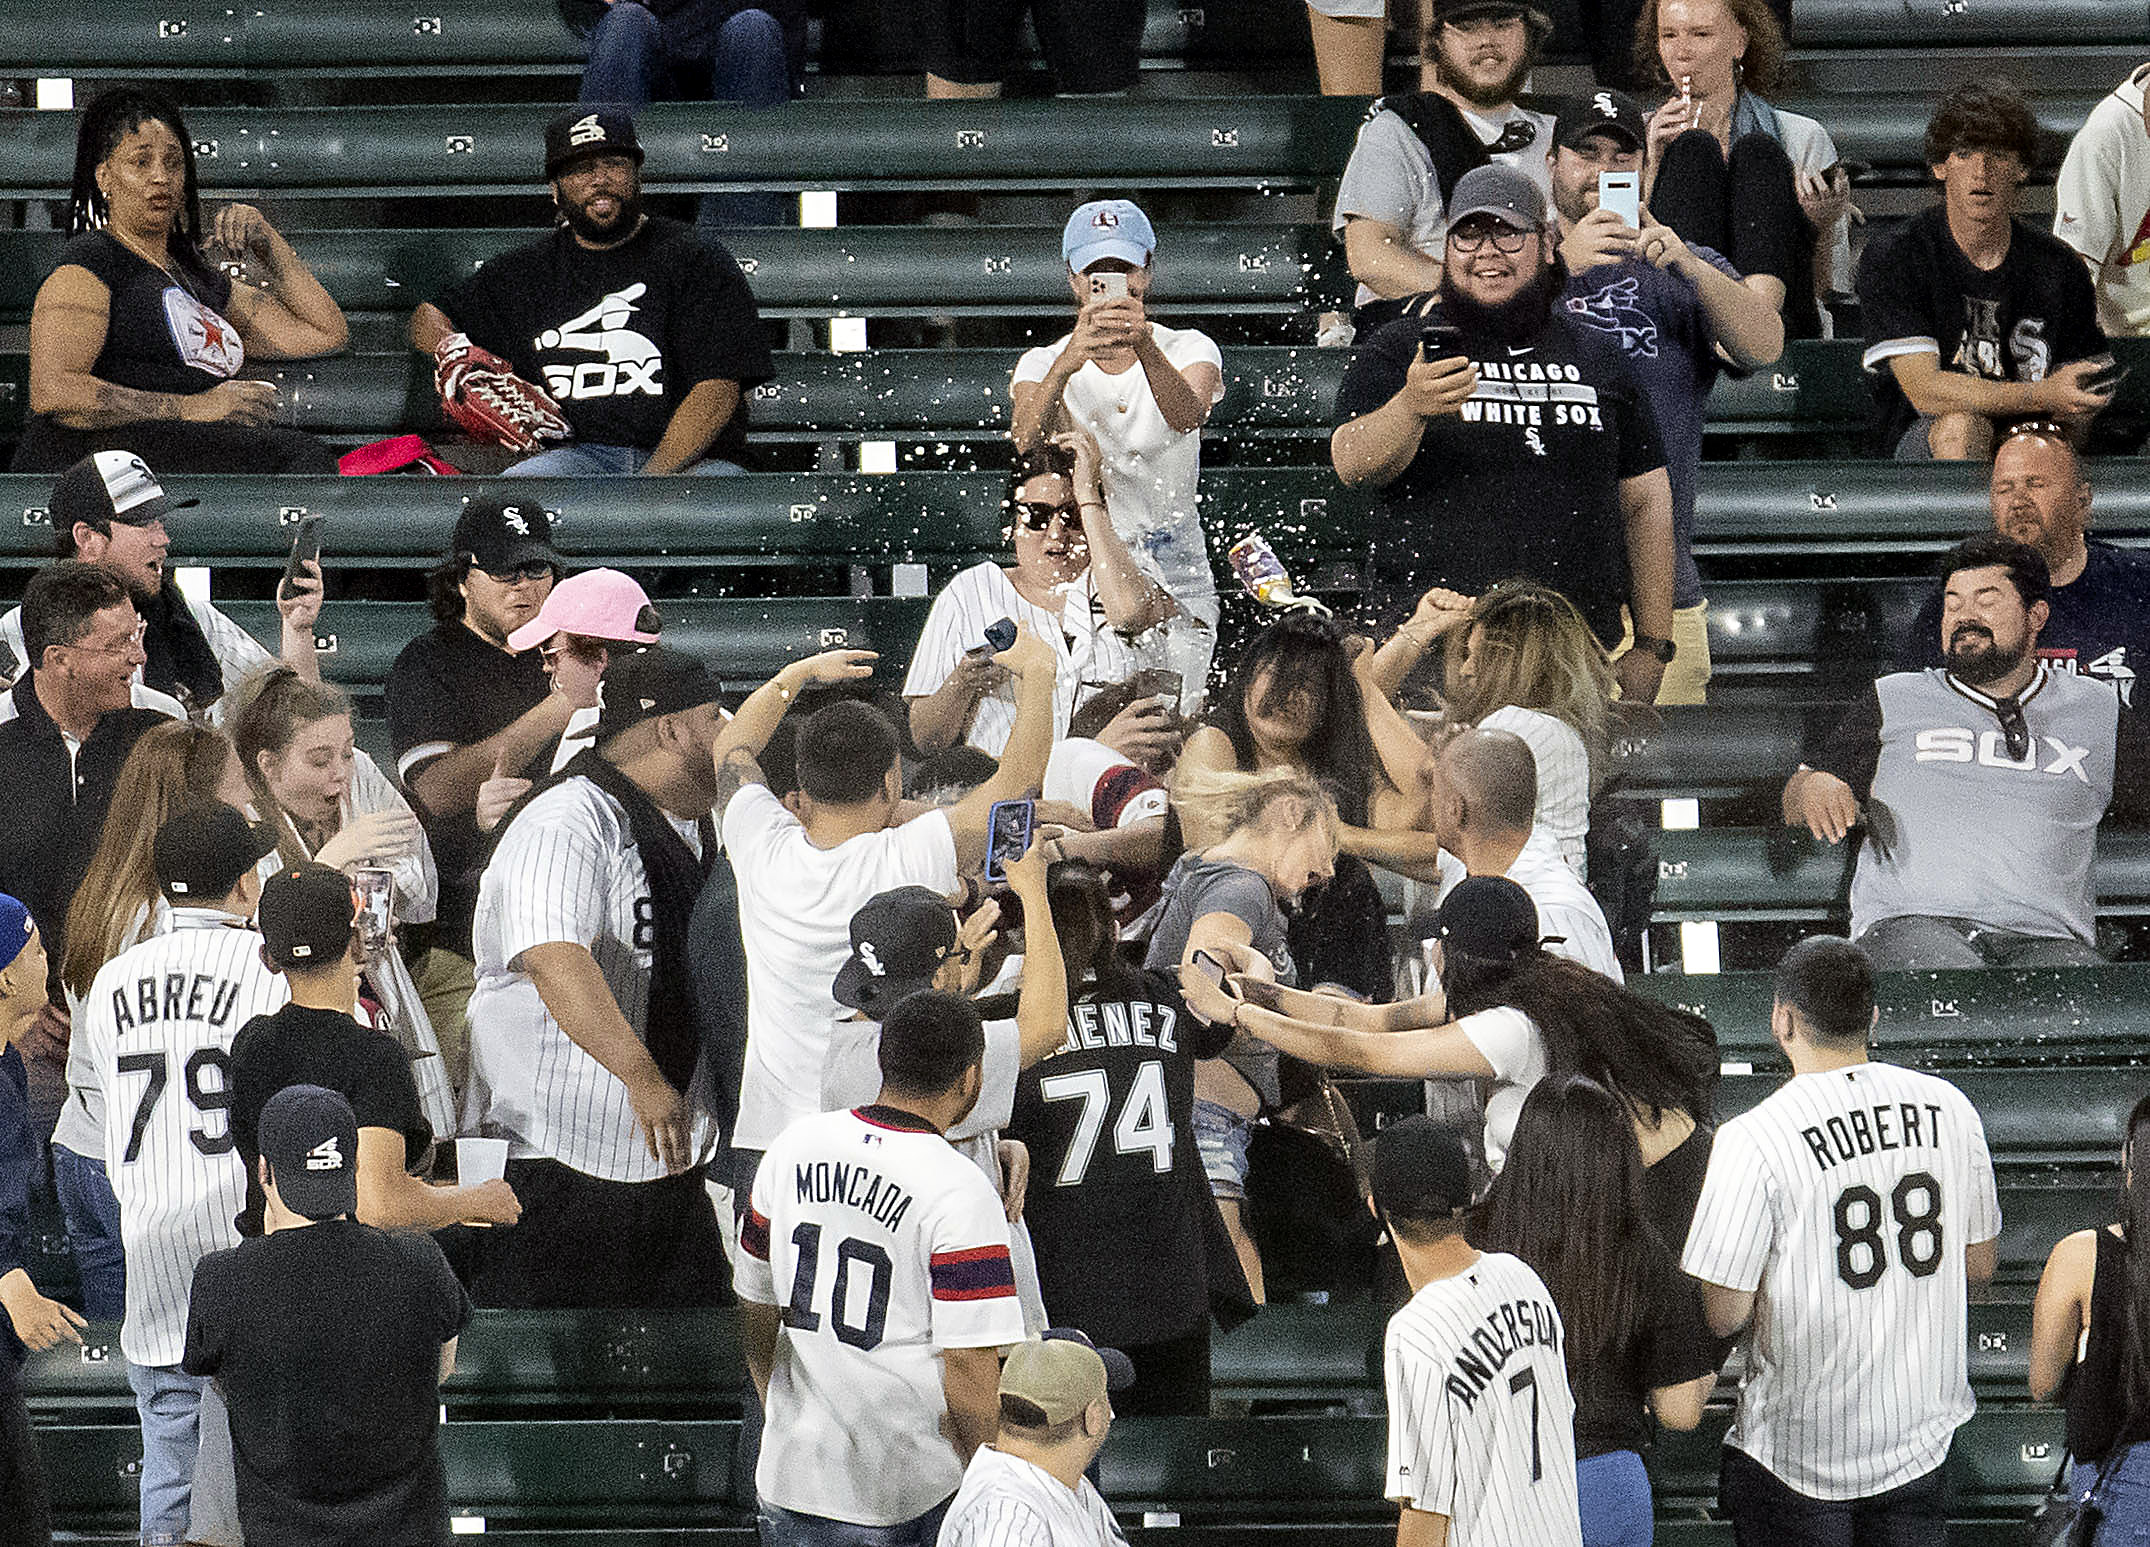 Brian Cassella on X: Fans fight in the bleachers during the 9th